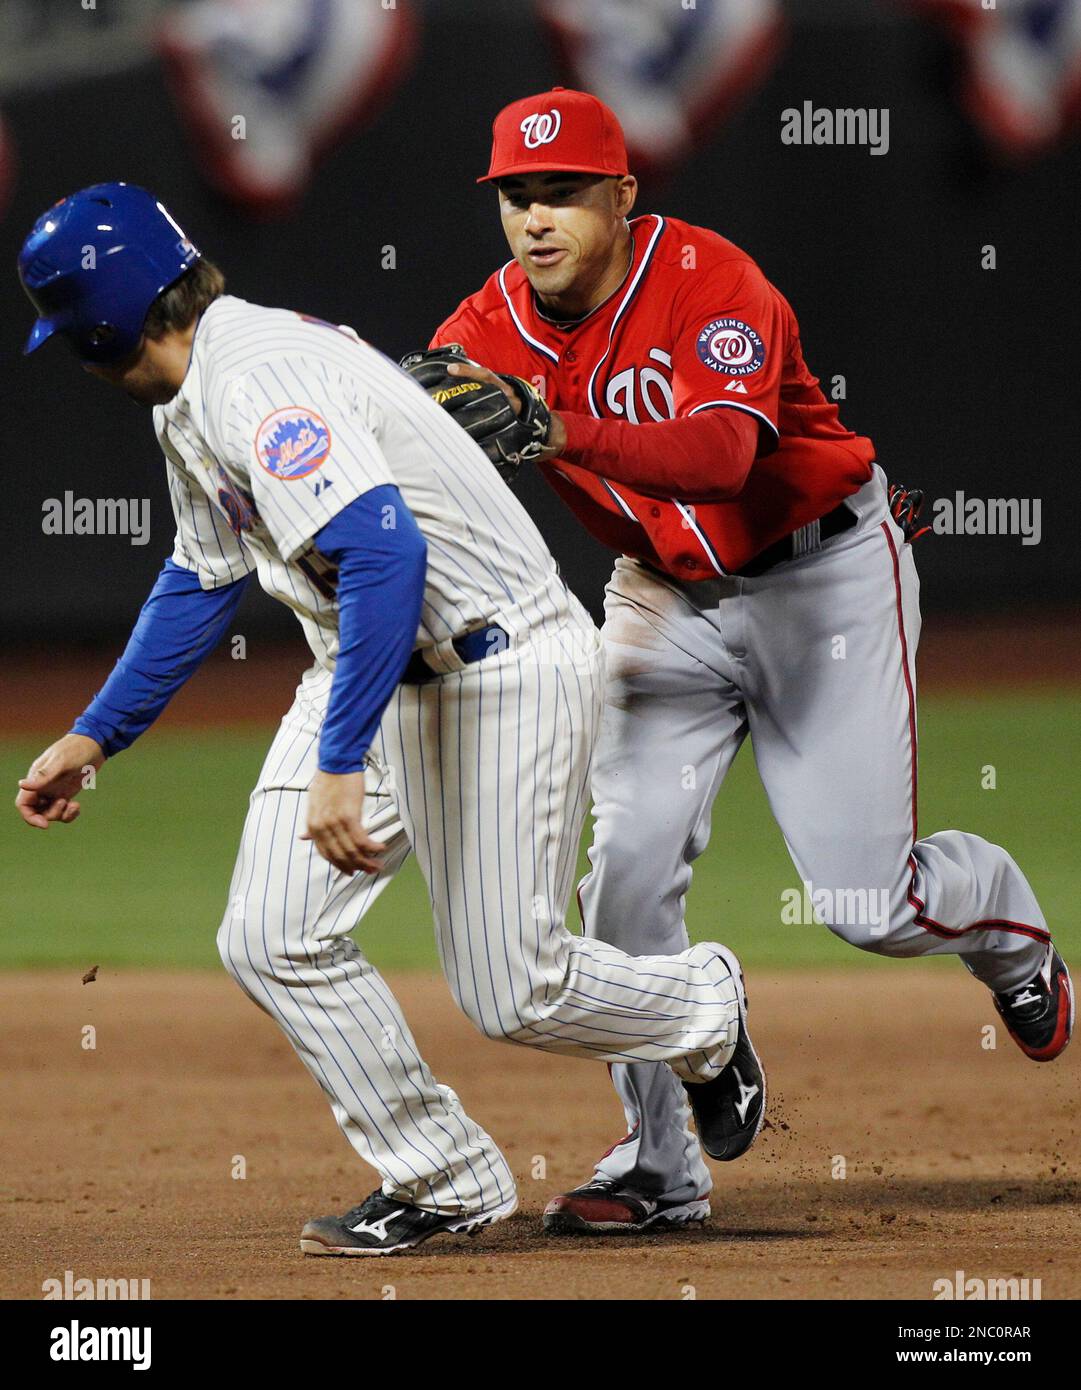 Washington Nationals' Ian Desmond, right, tags out New York Mets' Mike  Nickeas during the sixth inning of a baseball game on Saturday, April 9,  2011, at CitiField in New York. (AP Photo/Frank